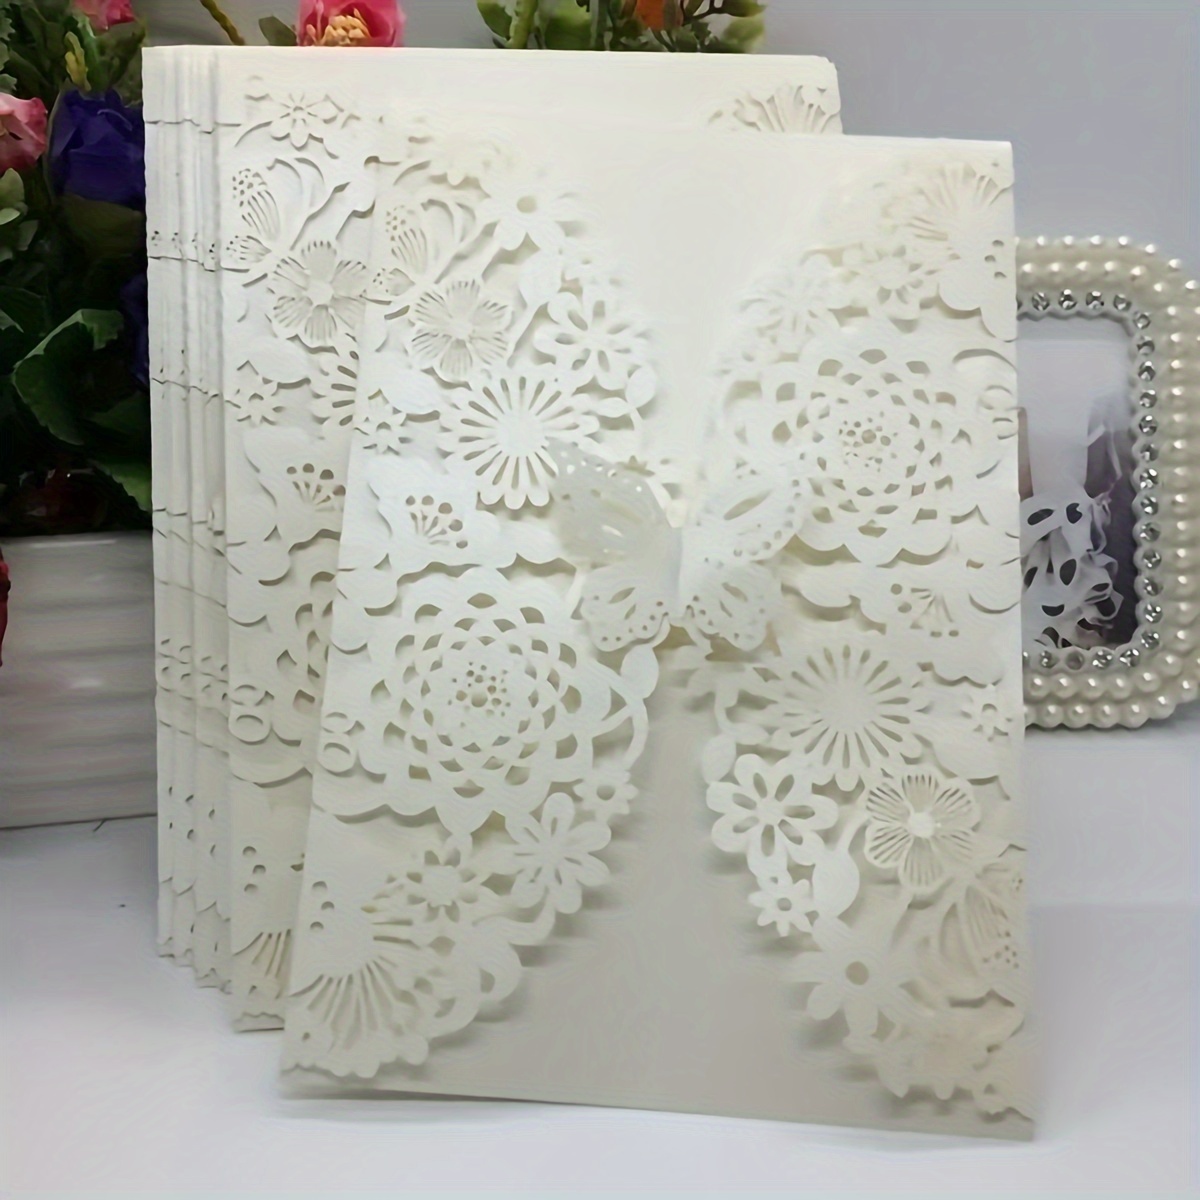 

10-pack Elegant Laser-cut Floral & Butterfly Invitation Cards For Adult Birthdays, Engagements, Weddings - Pearlescent Paper, No Envelopes Included